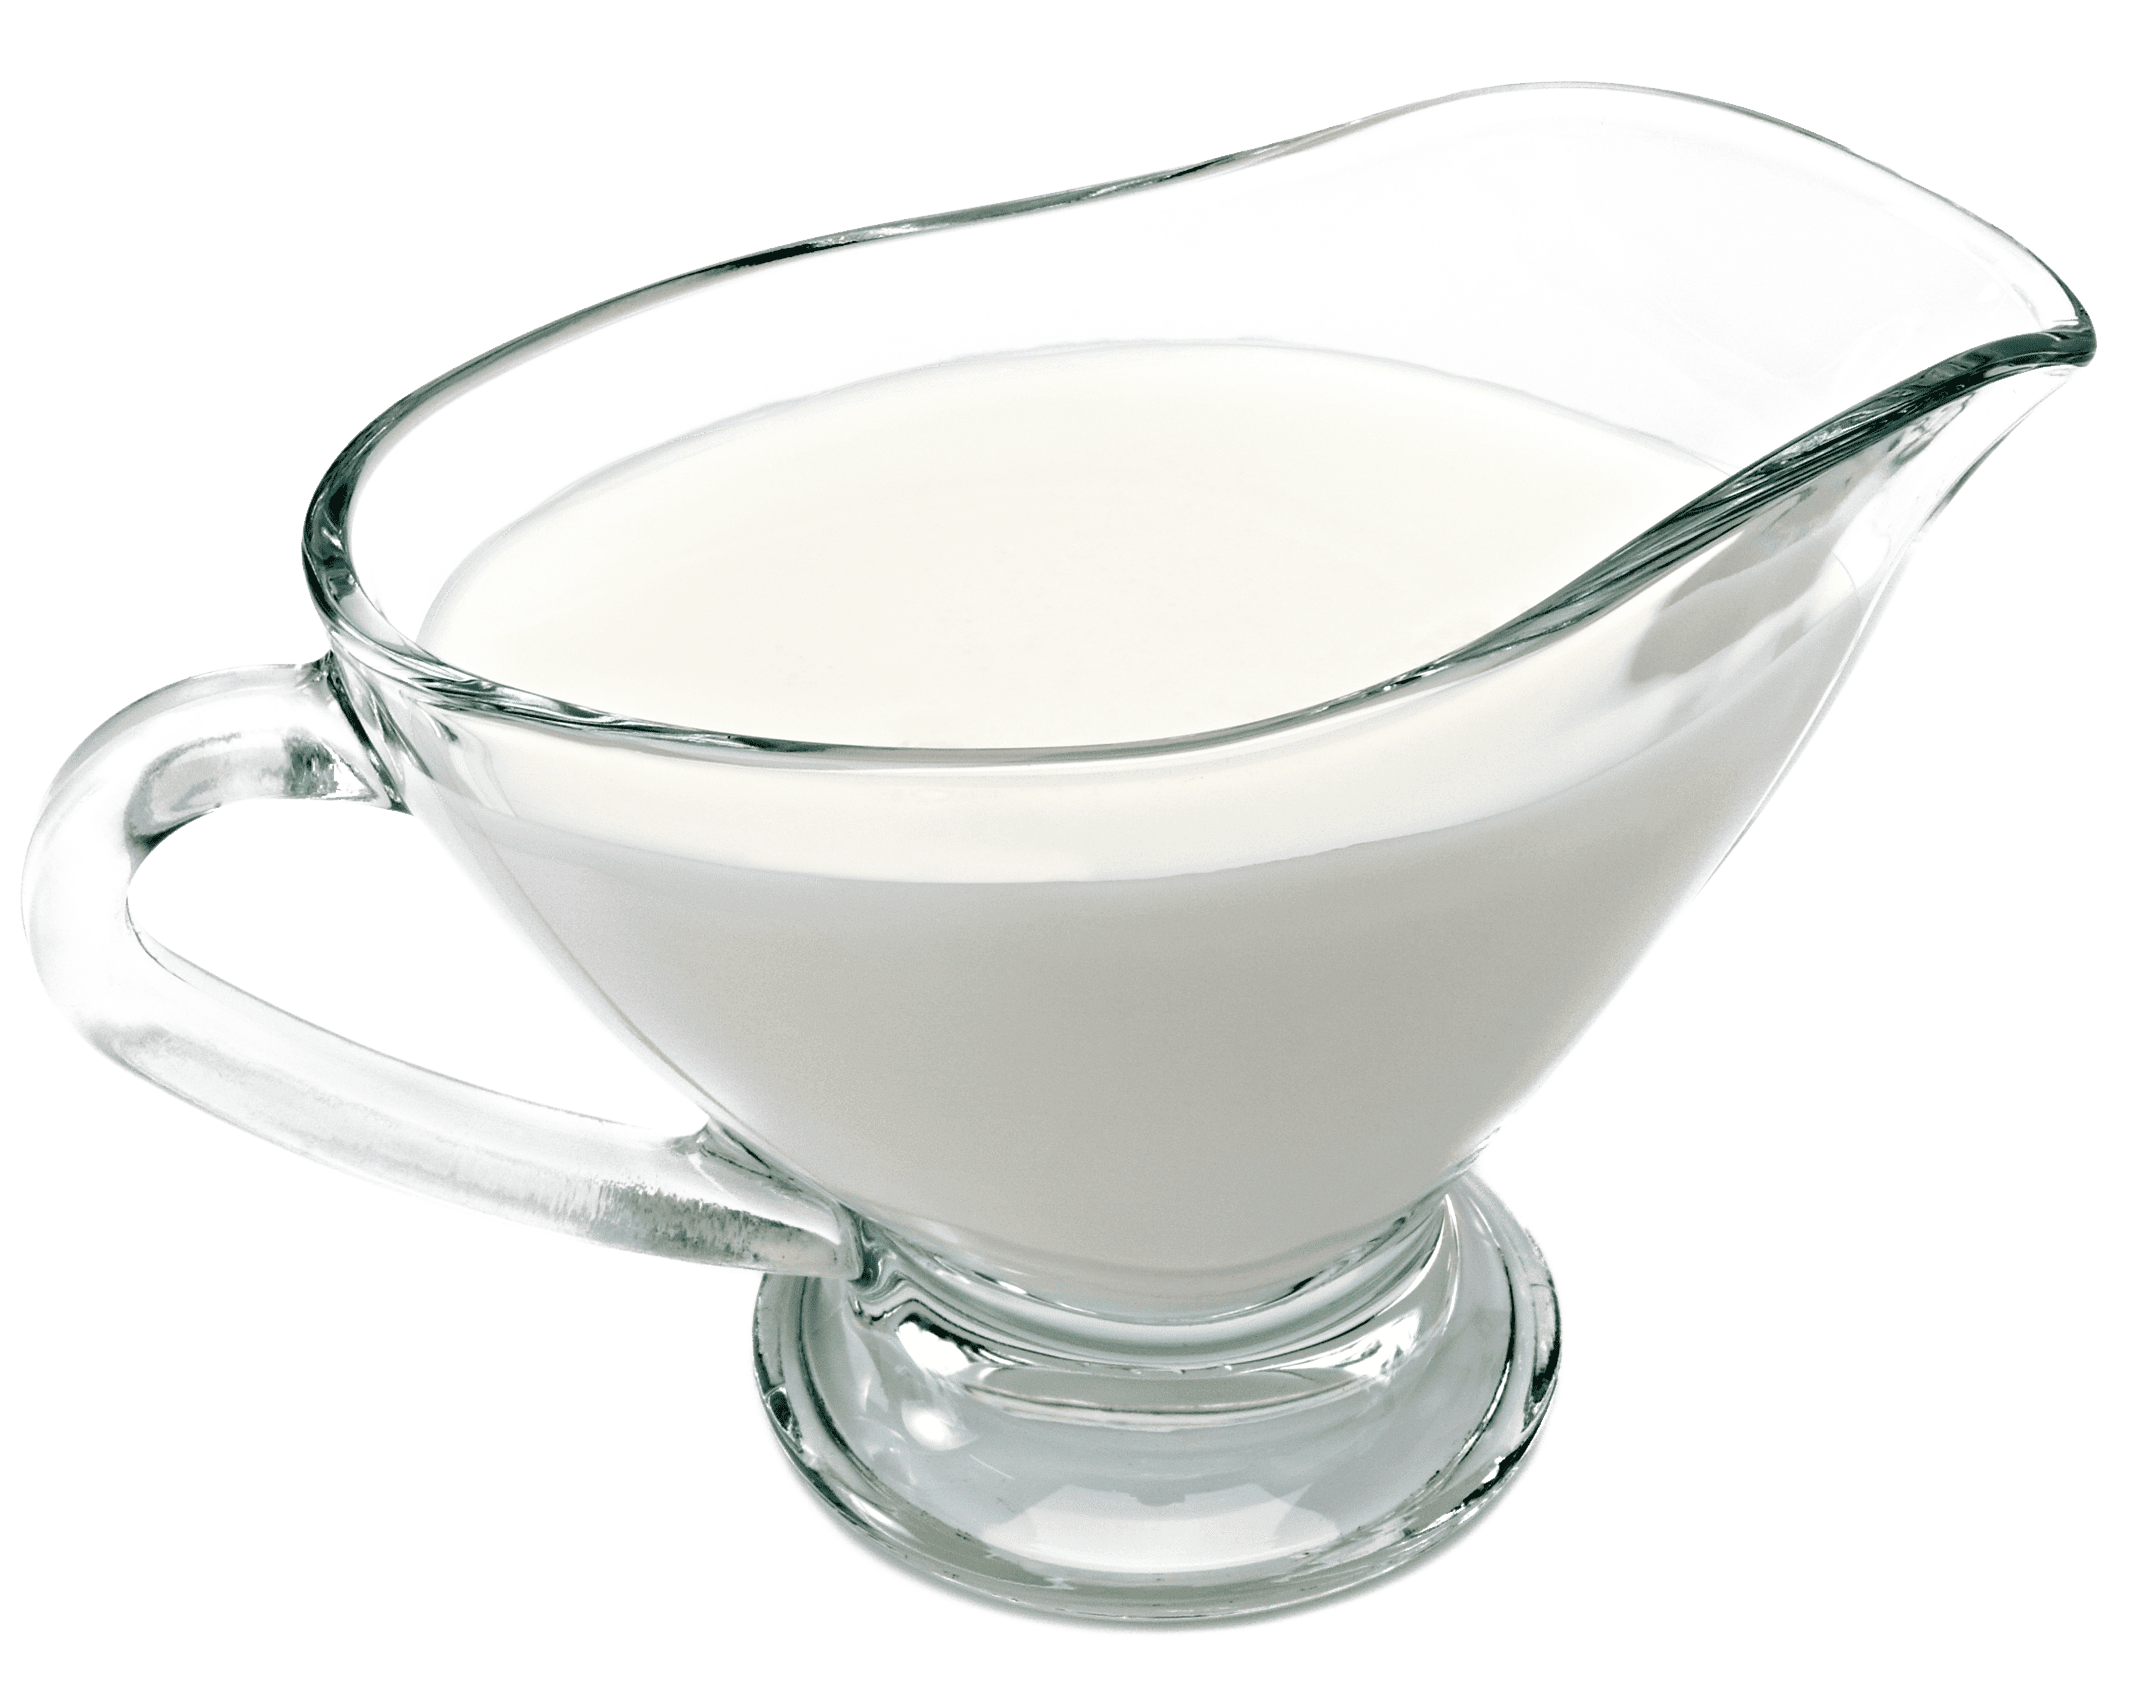 Whipping cream in a glass creamer